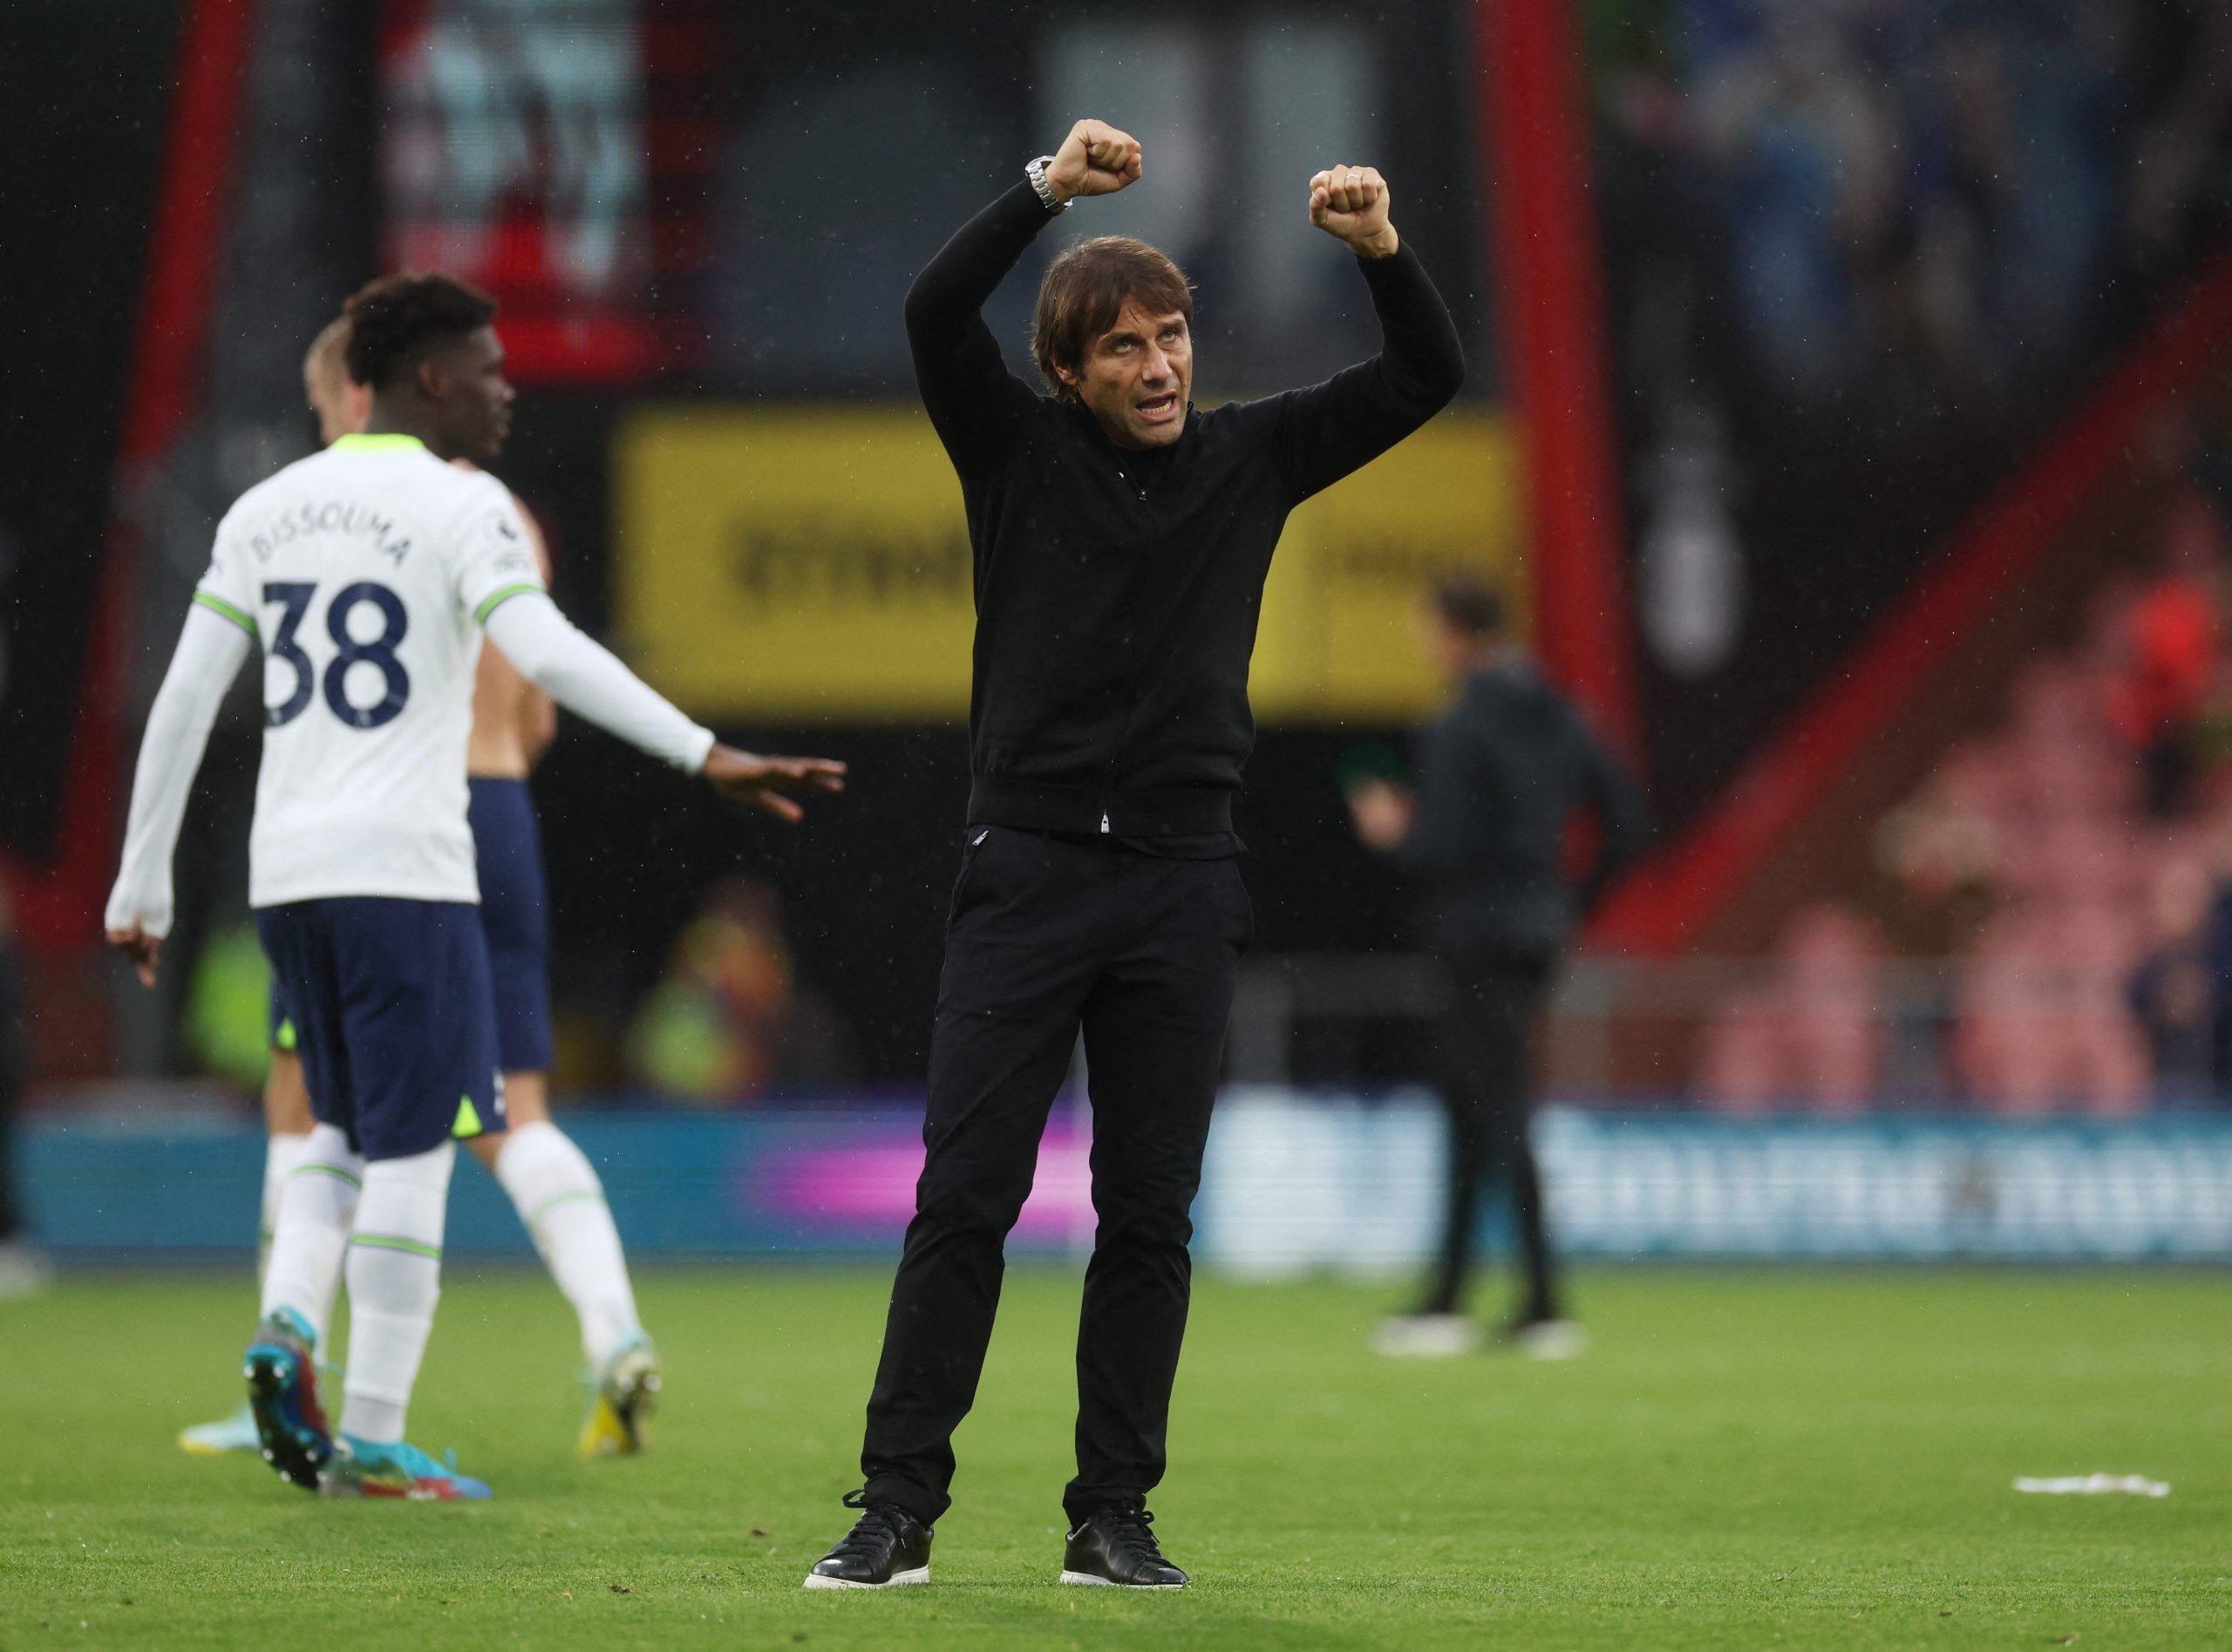 Soccer Football - Premier League - AFC Bournemouth v Tottenham Hotspur - Vitality Stadium, Bournemouth, Britain - October 29, 2022 Tottenham Hotspur manager Antonio Conte celebrates after the match Action Images via Reuters/Paul Childs EDITORIAL USE ONLY. No use with unauthorized audio, video, data, fixture lists, club/league logos or 'live' services. Online in-match use limited to 75 images, no video emulation. No use in betting, games or single club /league/player publications.  Please contact